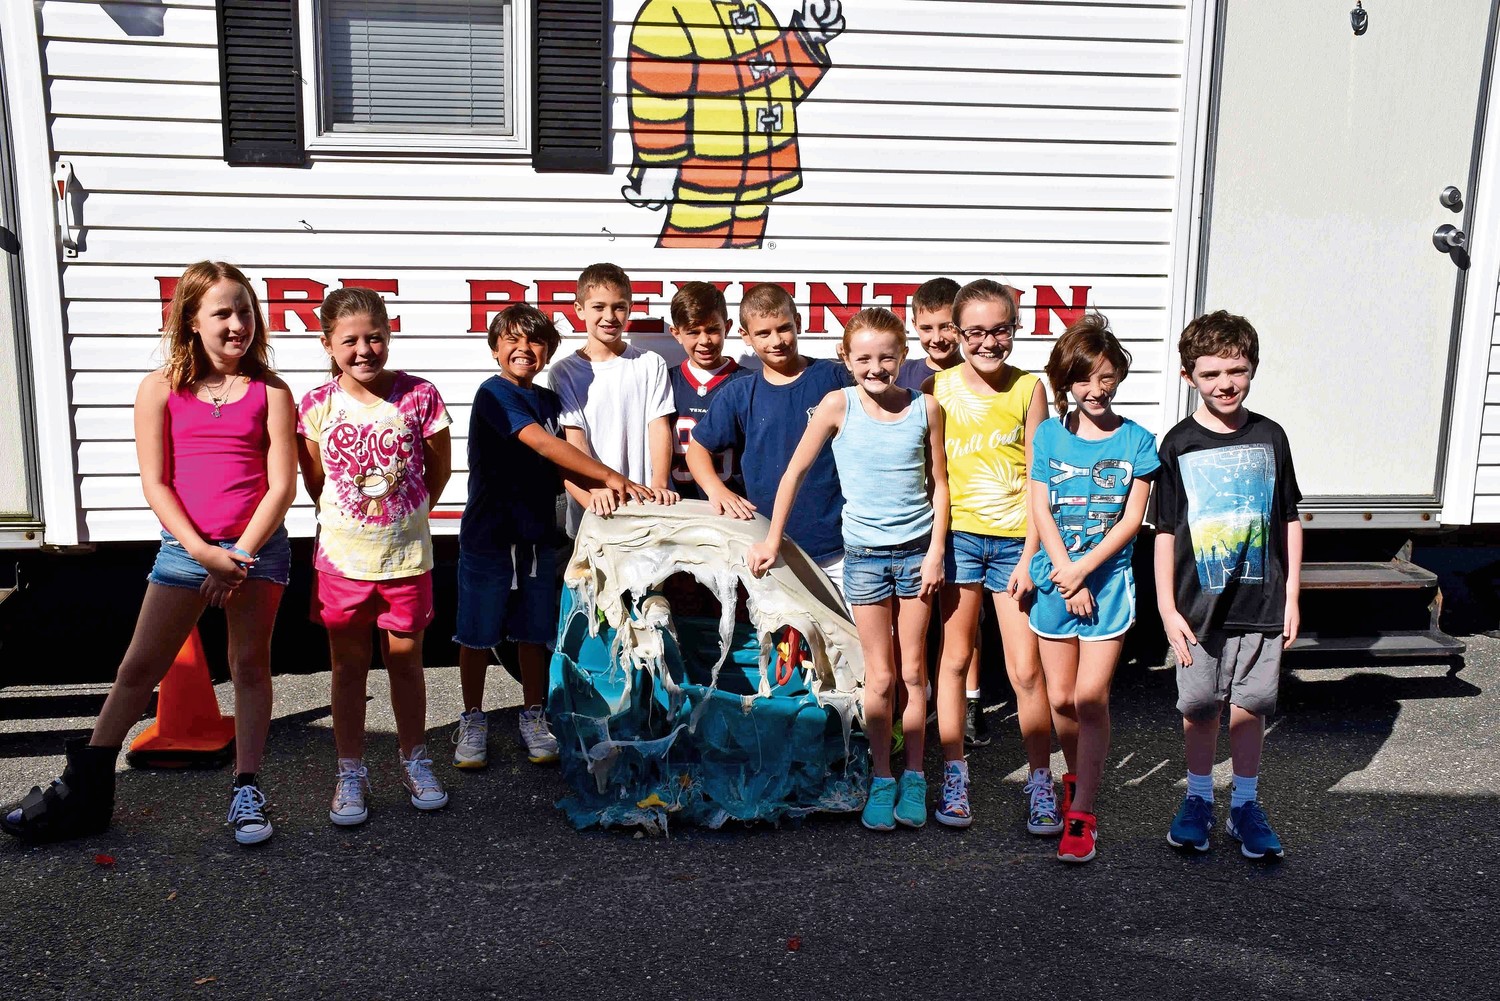 Lee Road Elementary School fourth-graders in Jackie Katz-Rabinoff’s class practiced fire safety in a Smoke House on Sept. 28.